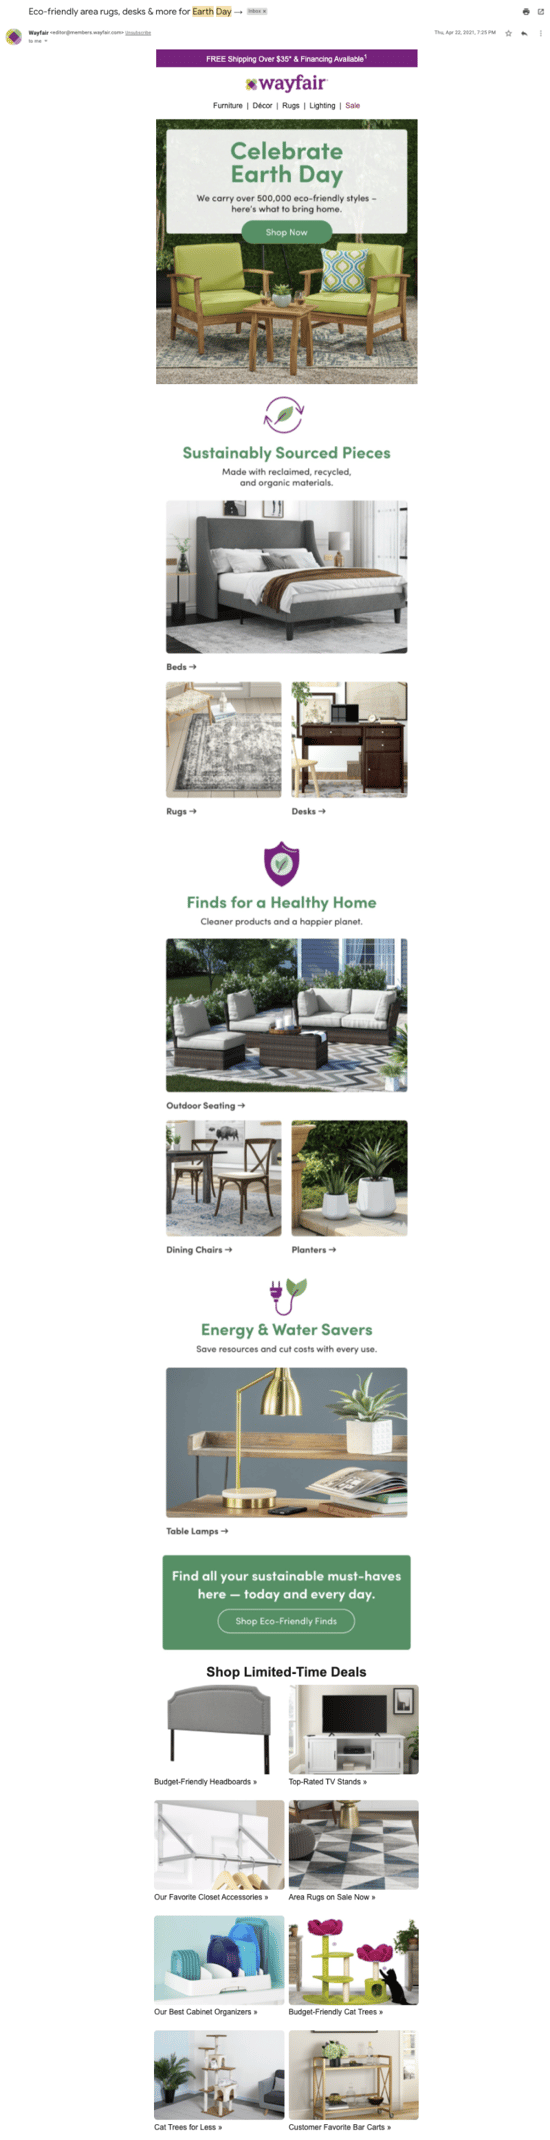 Wayfair Earth Day email example